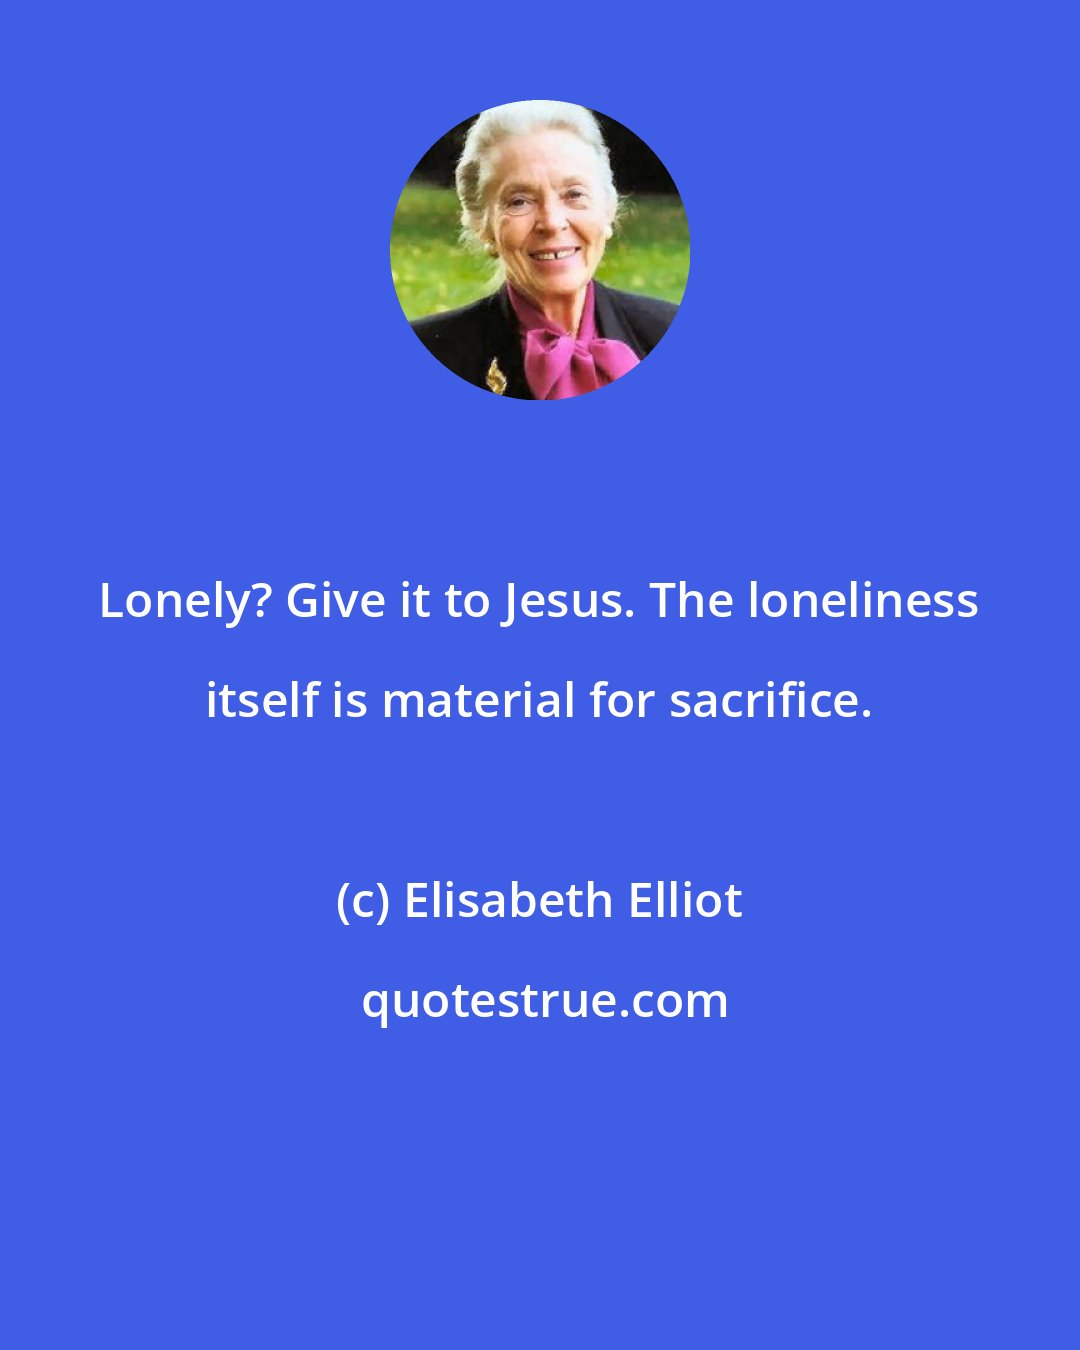 Elisabeth Elliot: Lonely? Give it to Jesus. The loneliness itself is material for sacrifice.